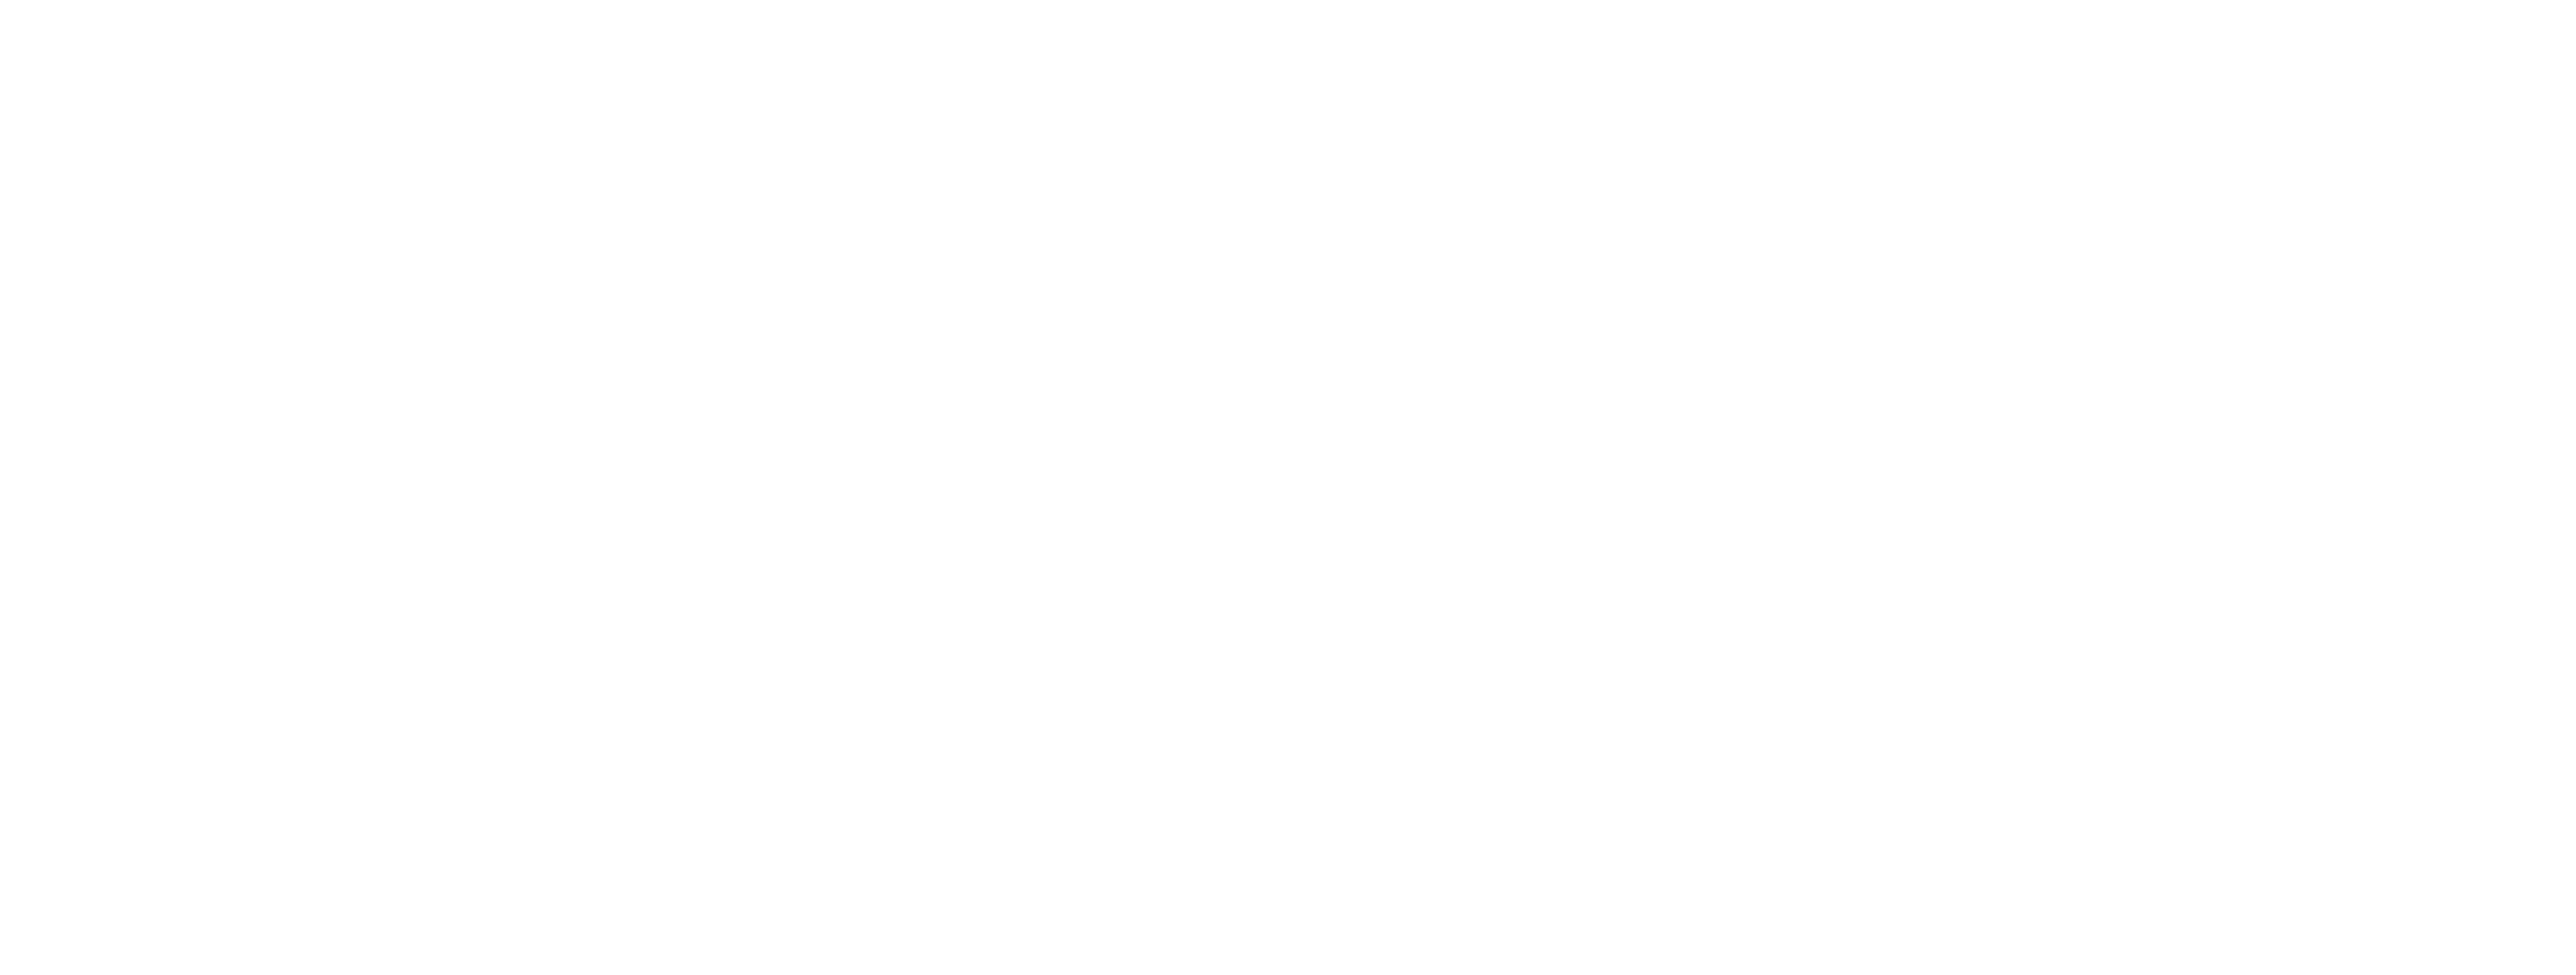 Oster Logo - Oster Philippines – Appliances Legendary Performance, Designed to ...